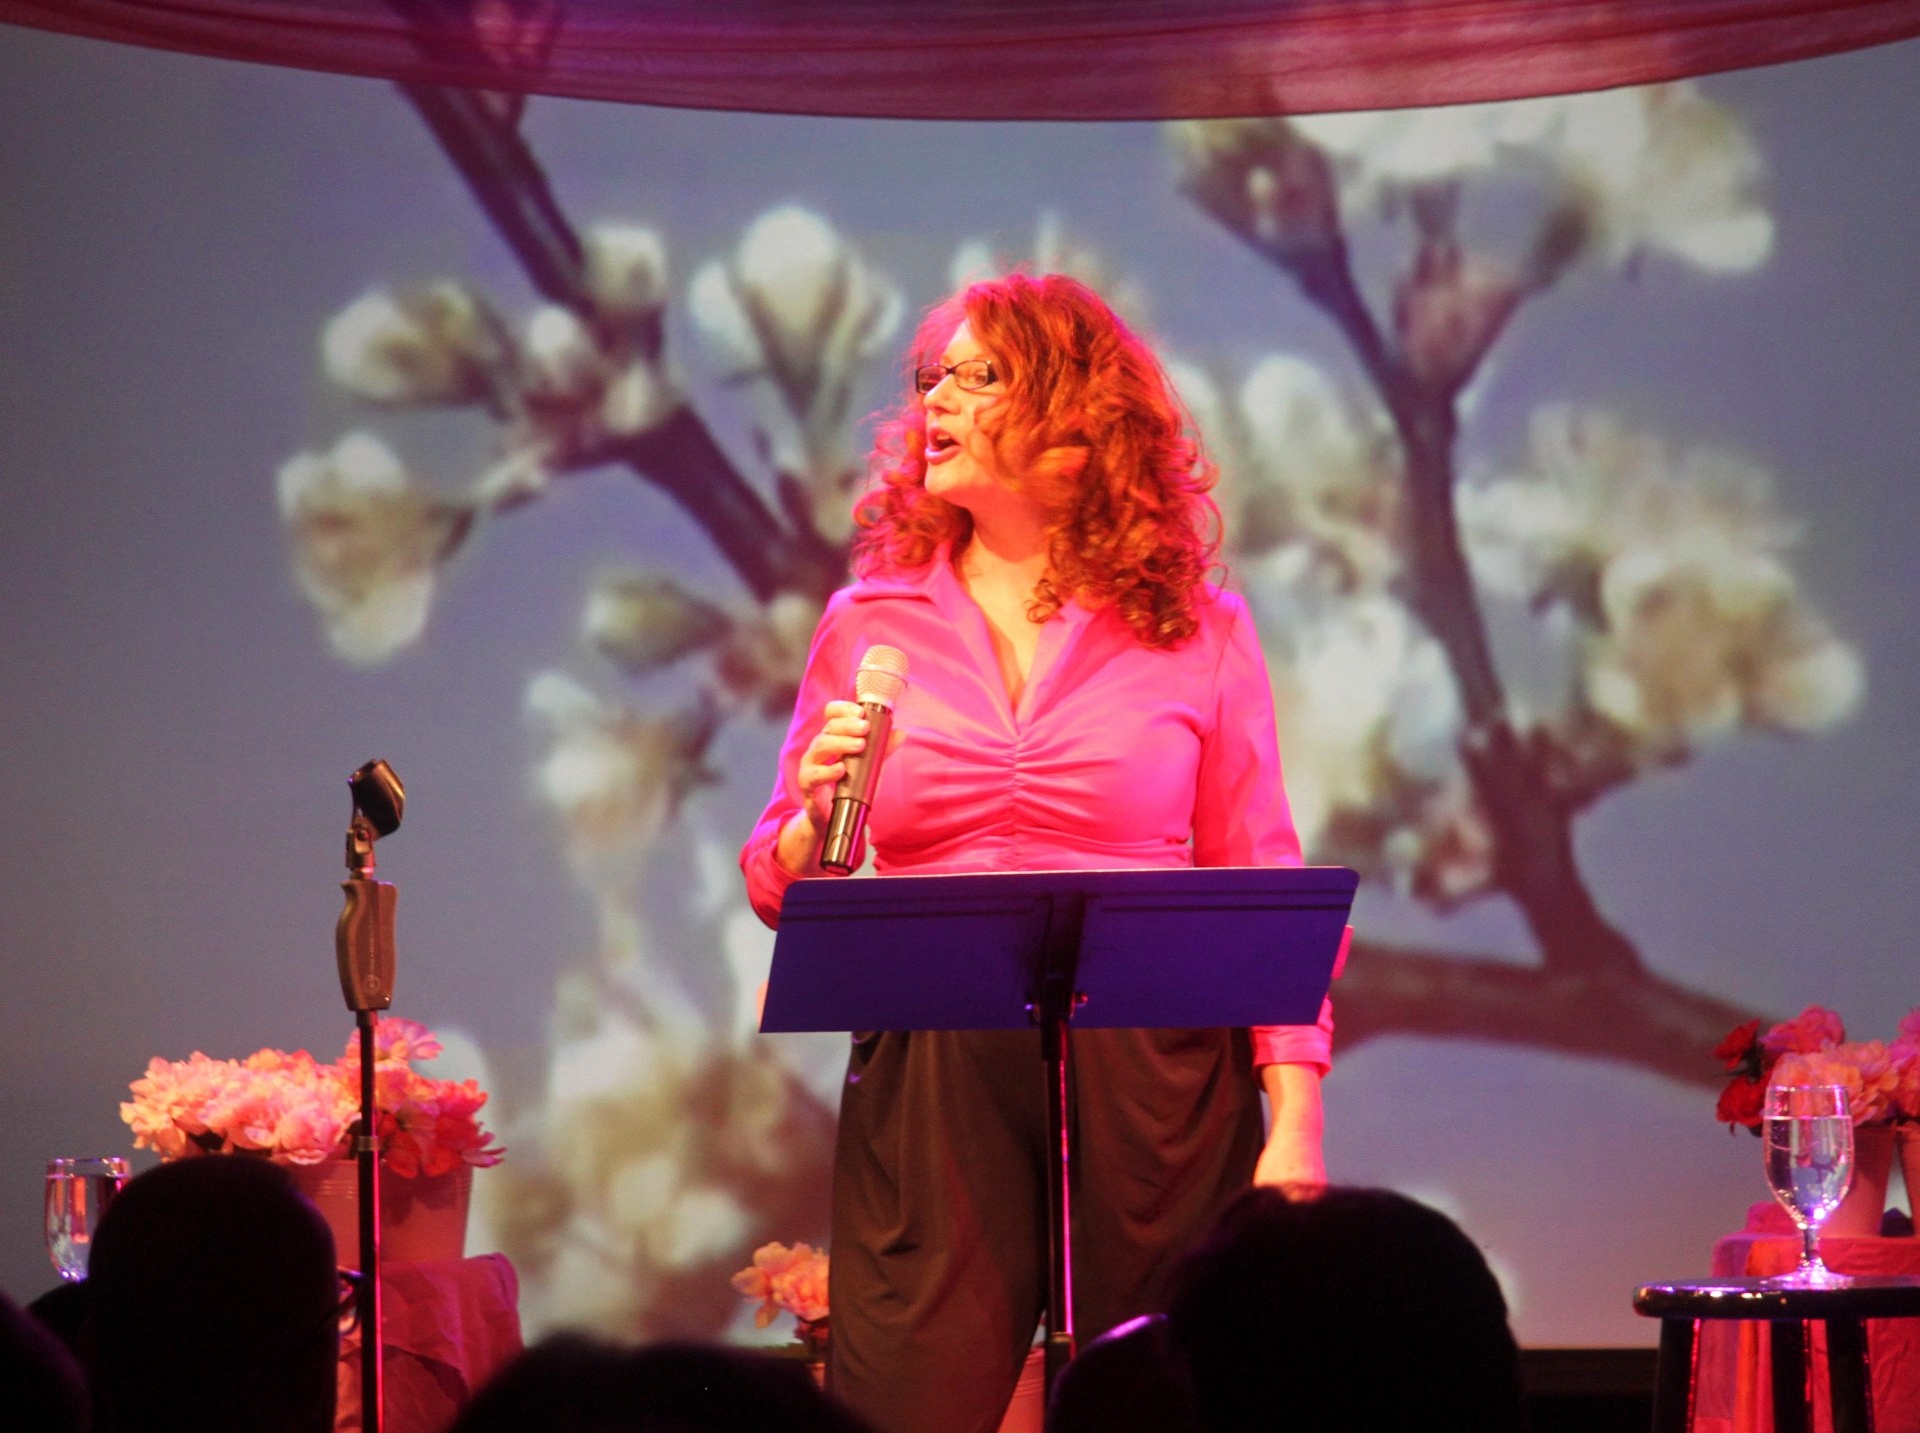 Karen Finley behind a lecturn performing in pink top in front of projection of flowers